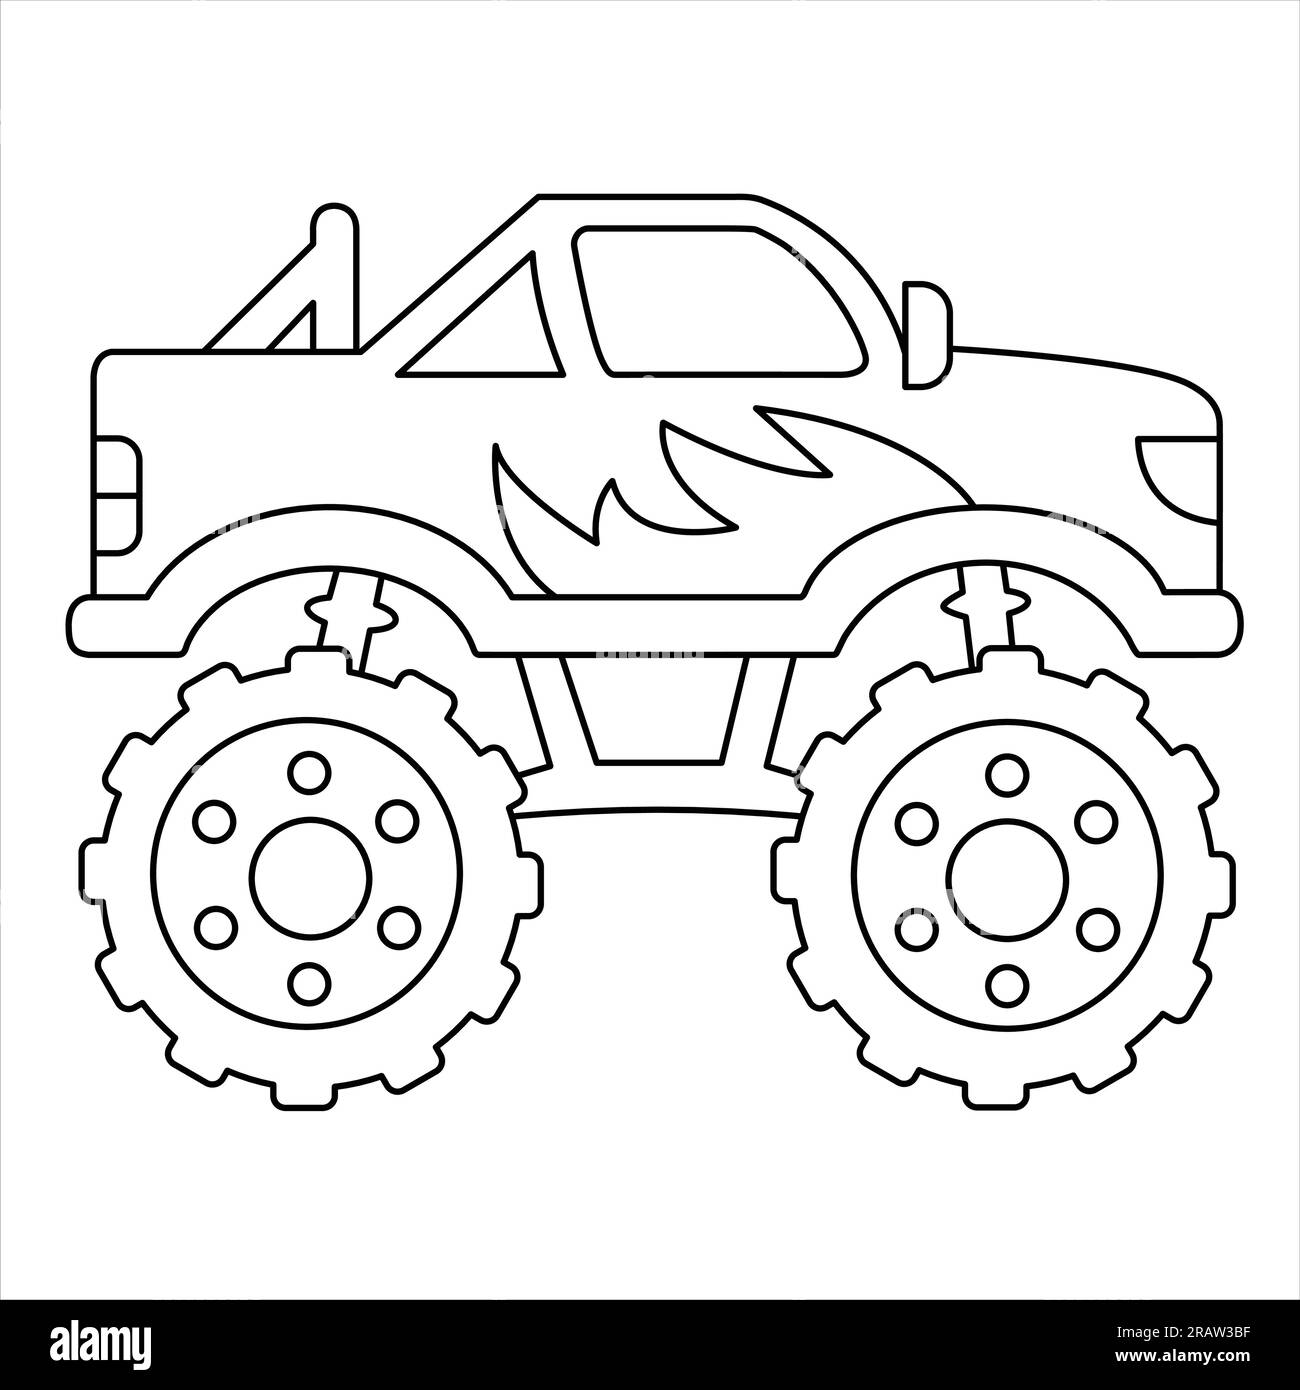 Cartoon Monster Truck Isolated on White Background, Vectors